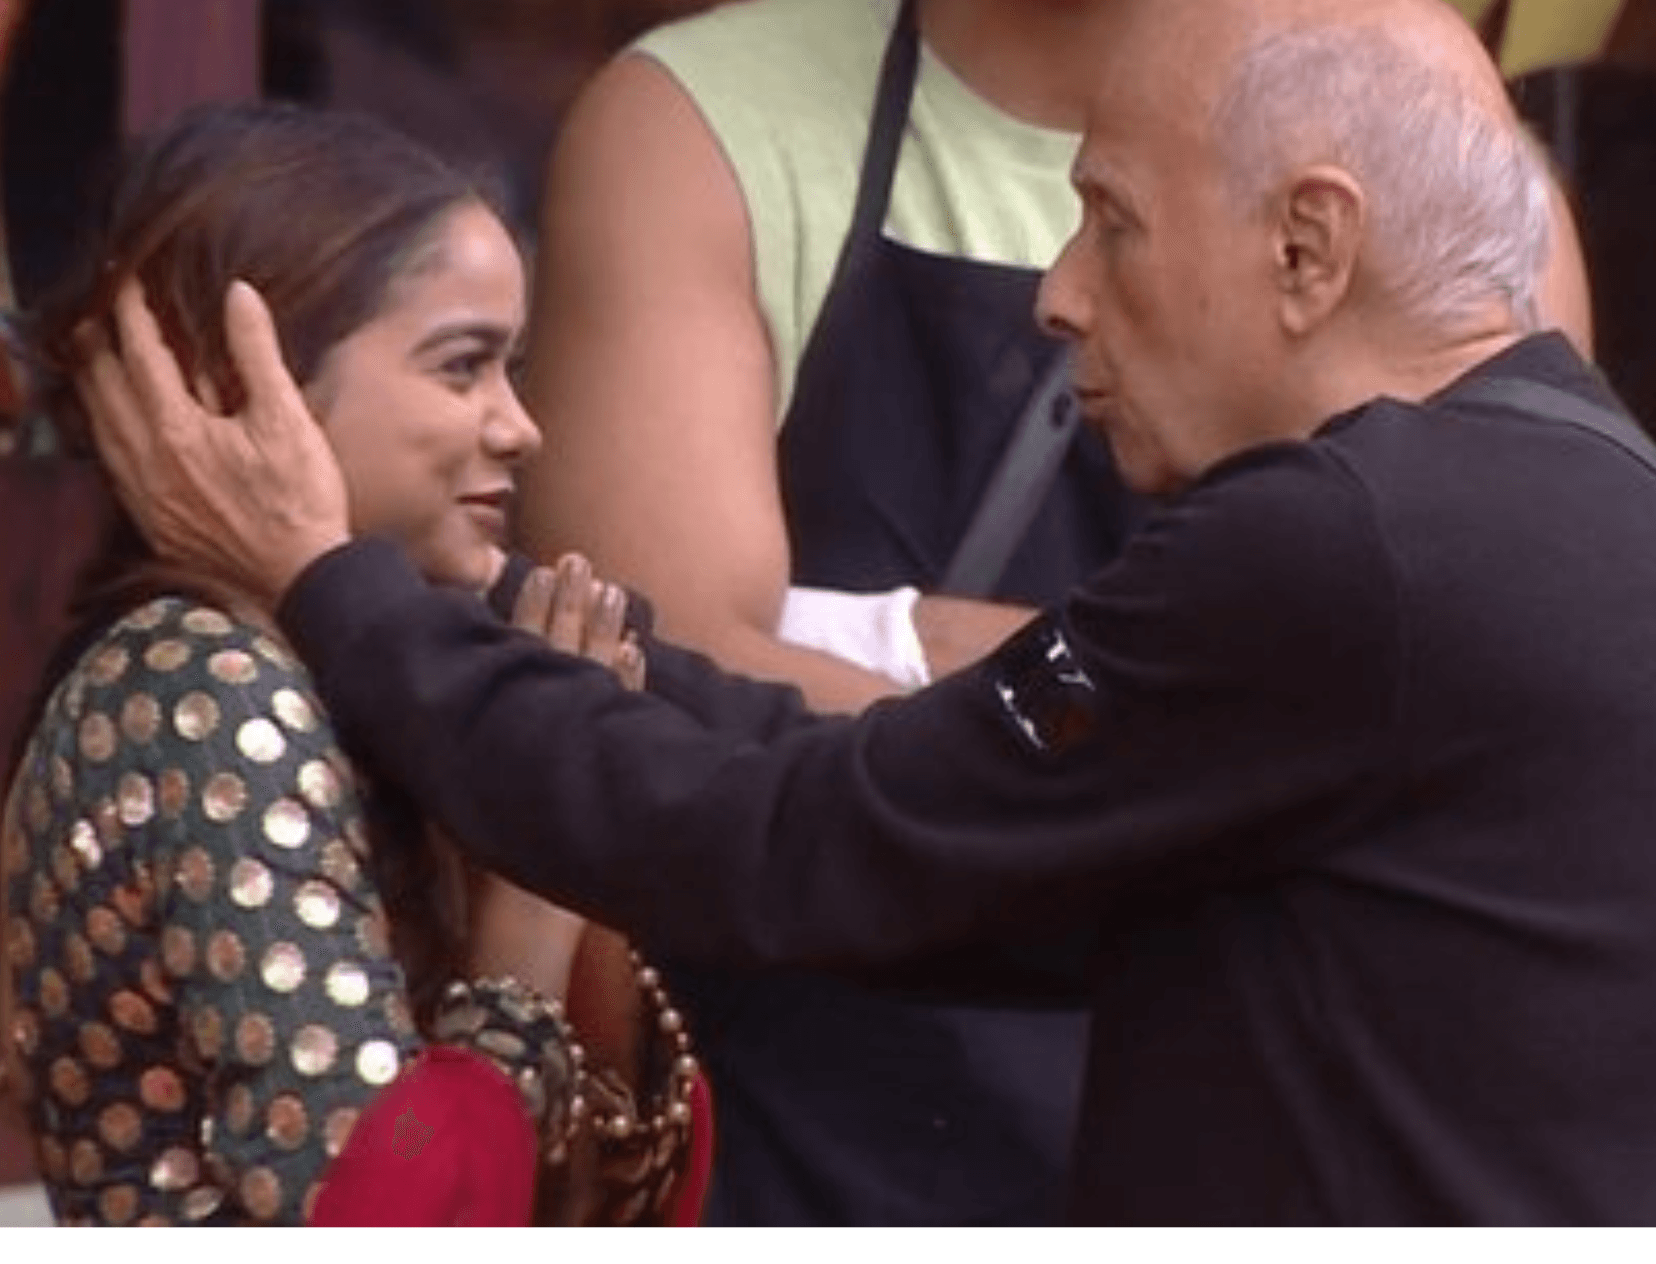 Mahesh Bhatt’s Touchy-Feely Act With Women Contestants Has Left Bigg Boss Viewers Furious!